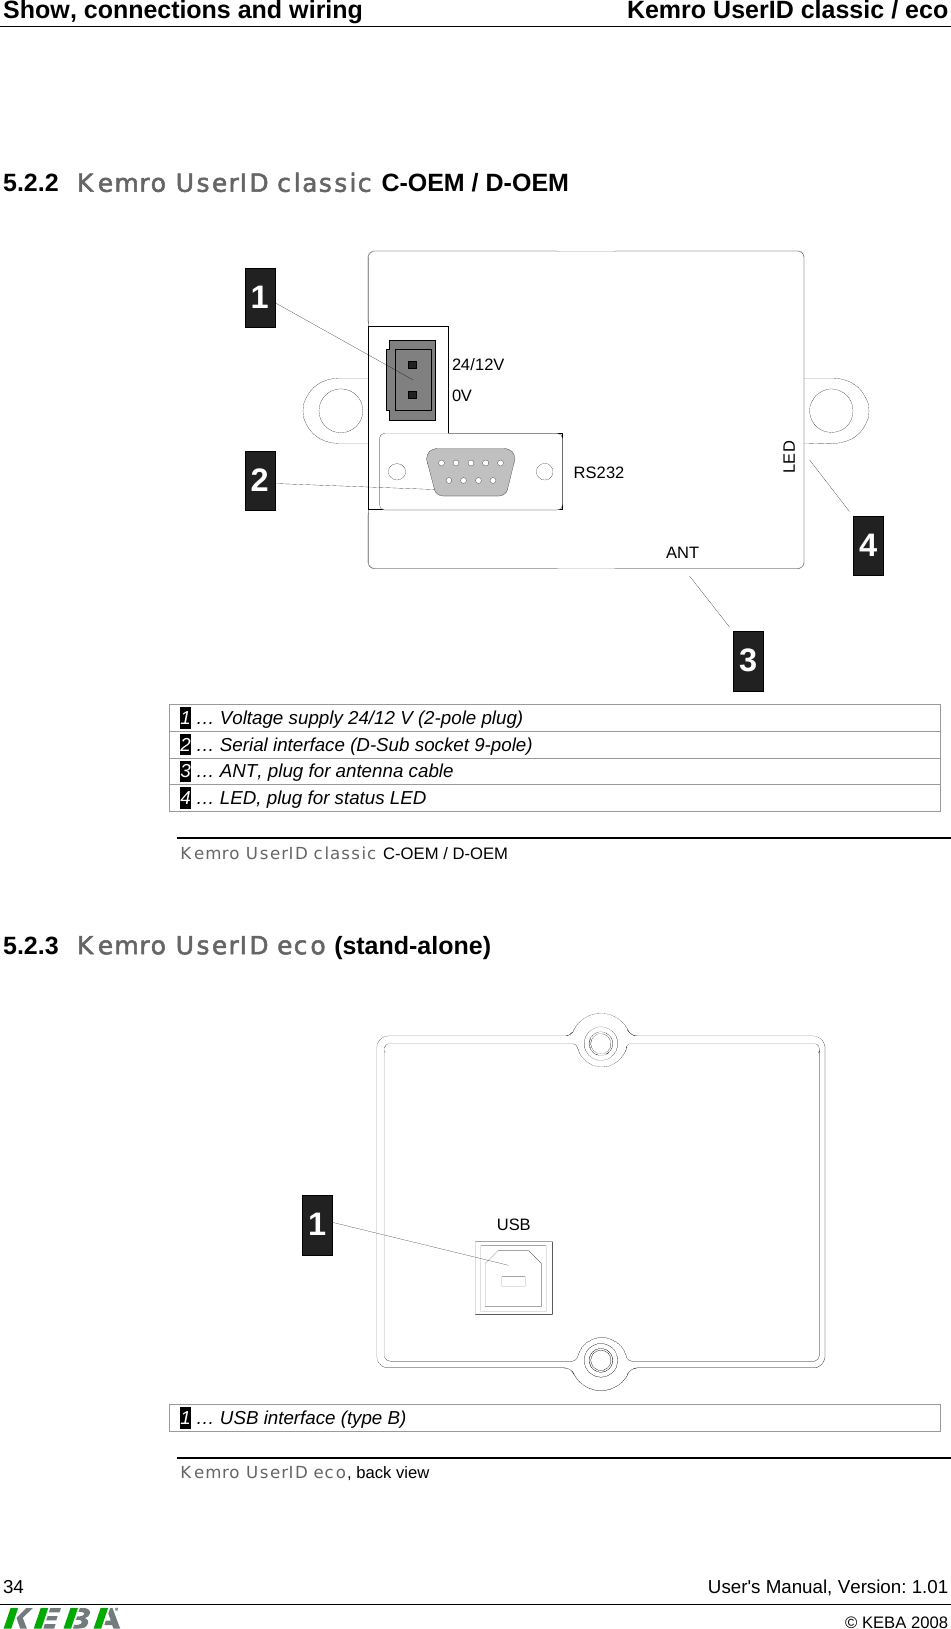 Show, connections and wiring  Kemro UserID classic / eco 34  User&apos;s Manual, Version: 1.01   © KEBA 2008 5.2.2  Kemro UserID classic C-OEM / D-OEM  24/12V0VRS232ANTLED1234 1 … Voltage supply 24/12 V (2-pole plug) 2 … Serial interface (D-Sub socket 9-pole) 3 … ANT, plug for antenna cable 4 … LED, plug for status LED Kemro UserID classic C-OEM / D-OEM 5.2.3  Kemro UserID eco (stand-alone)  USB1 1 … USB interface (type B) Kemro UserID eco, back view 